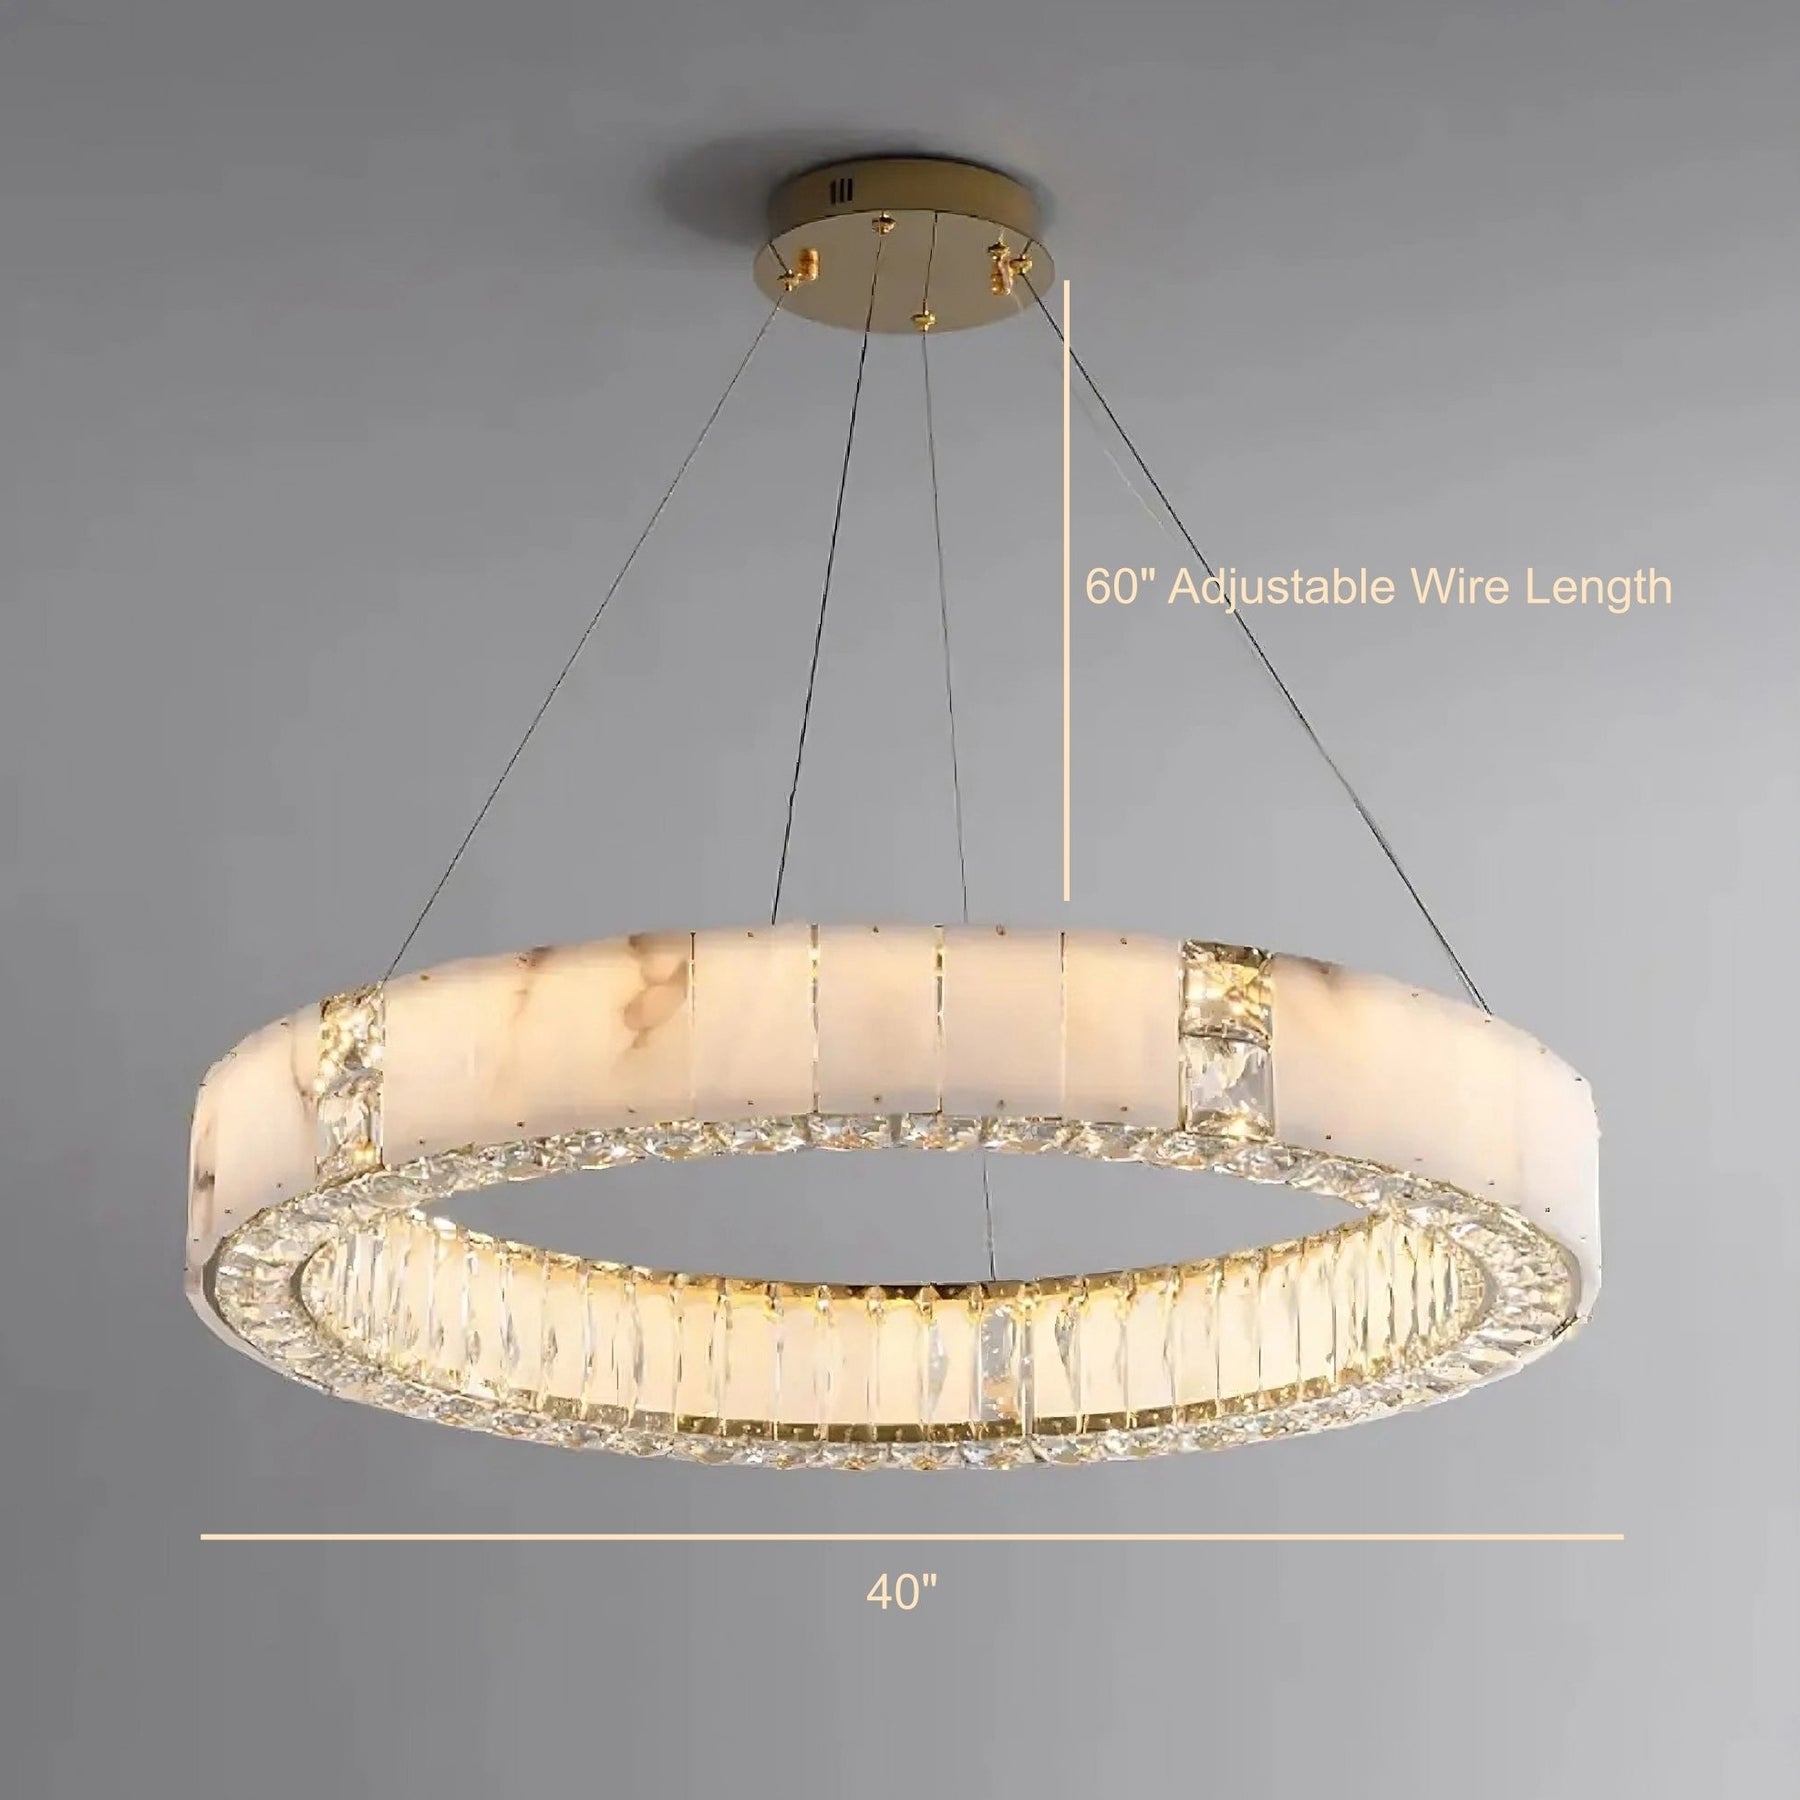 A Natural Marble & Crystal Modern Ceiling Light Fixture by Morsale.com with a 40" diameter and an adjustable wire length of 60". The ceiling light fixture features a sleek design with frosted and clear segments, creating an elegant and contemporary look perfect for luxury home décor.